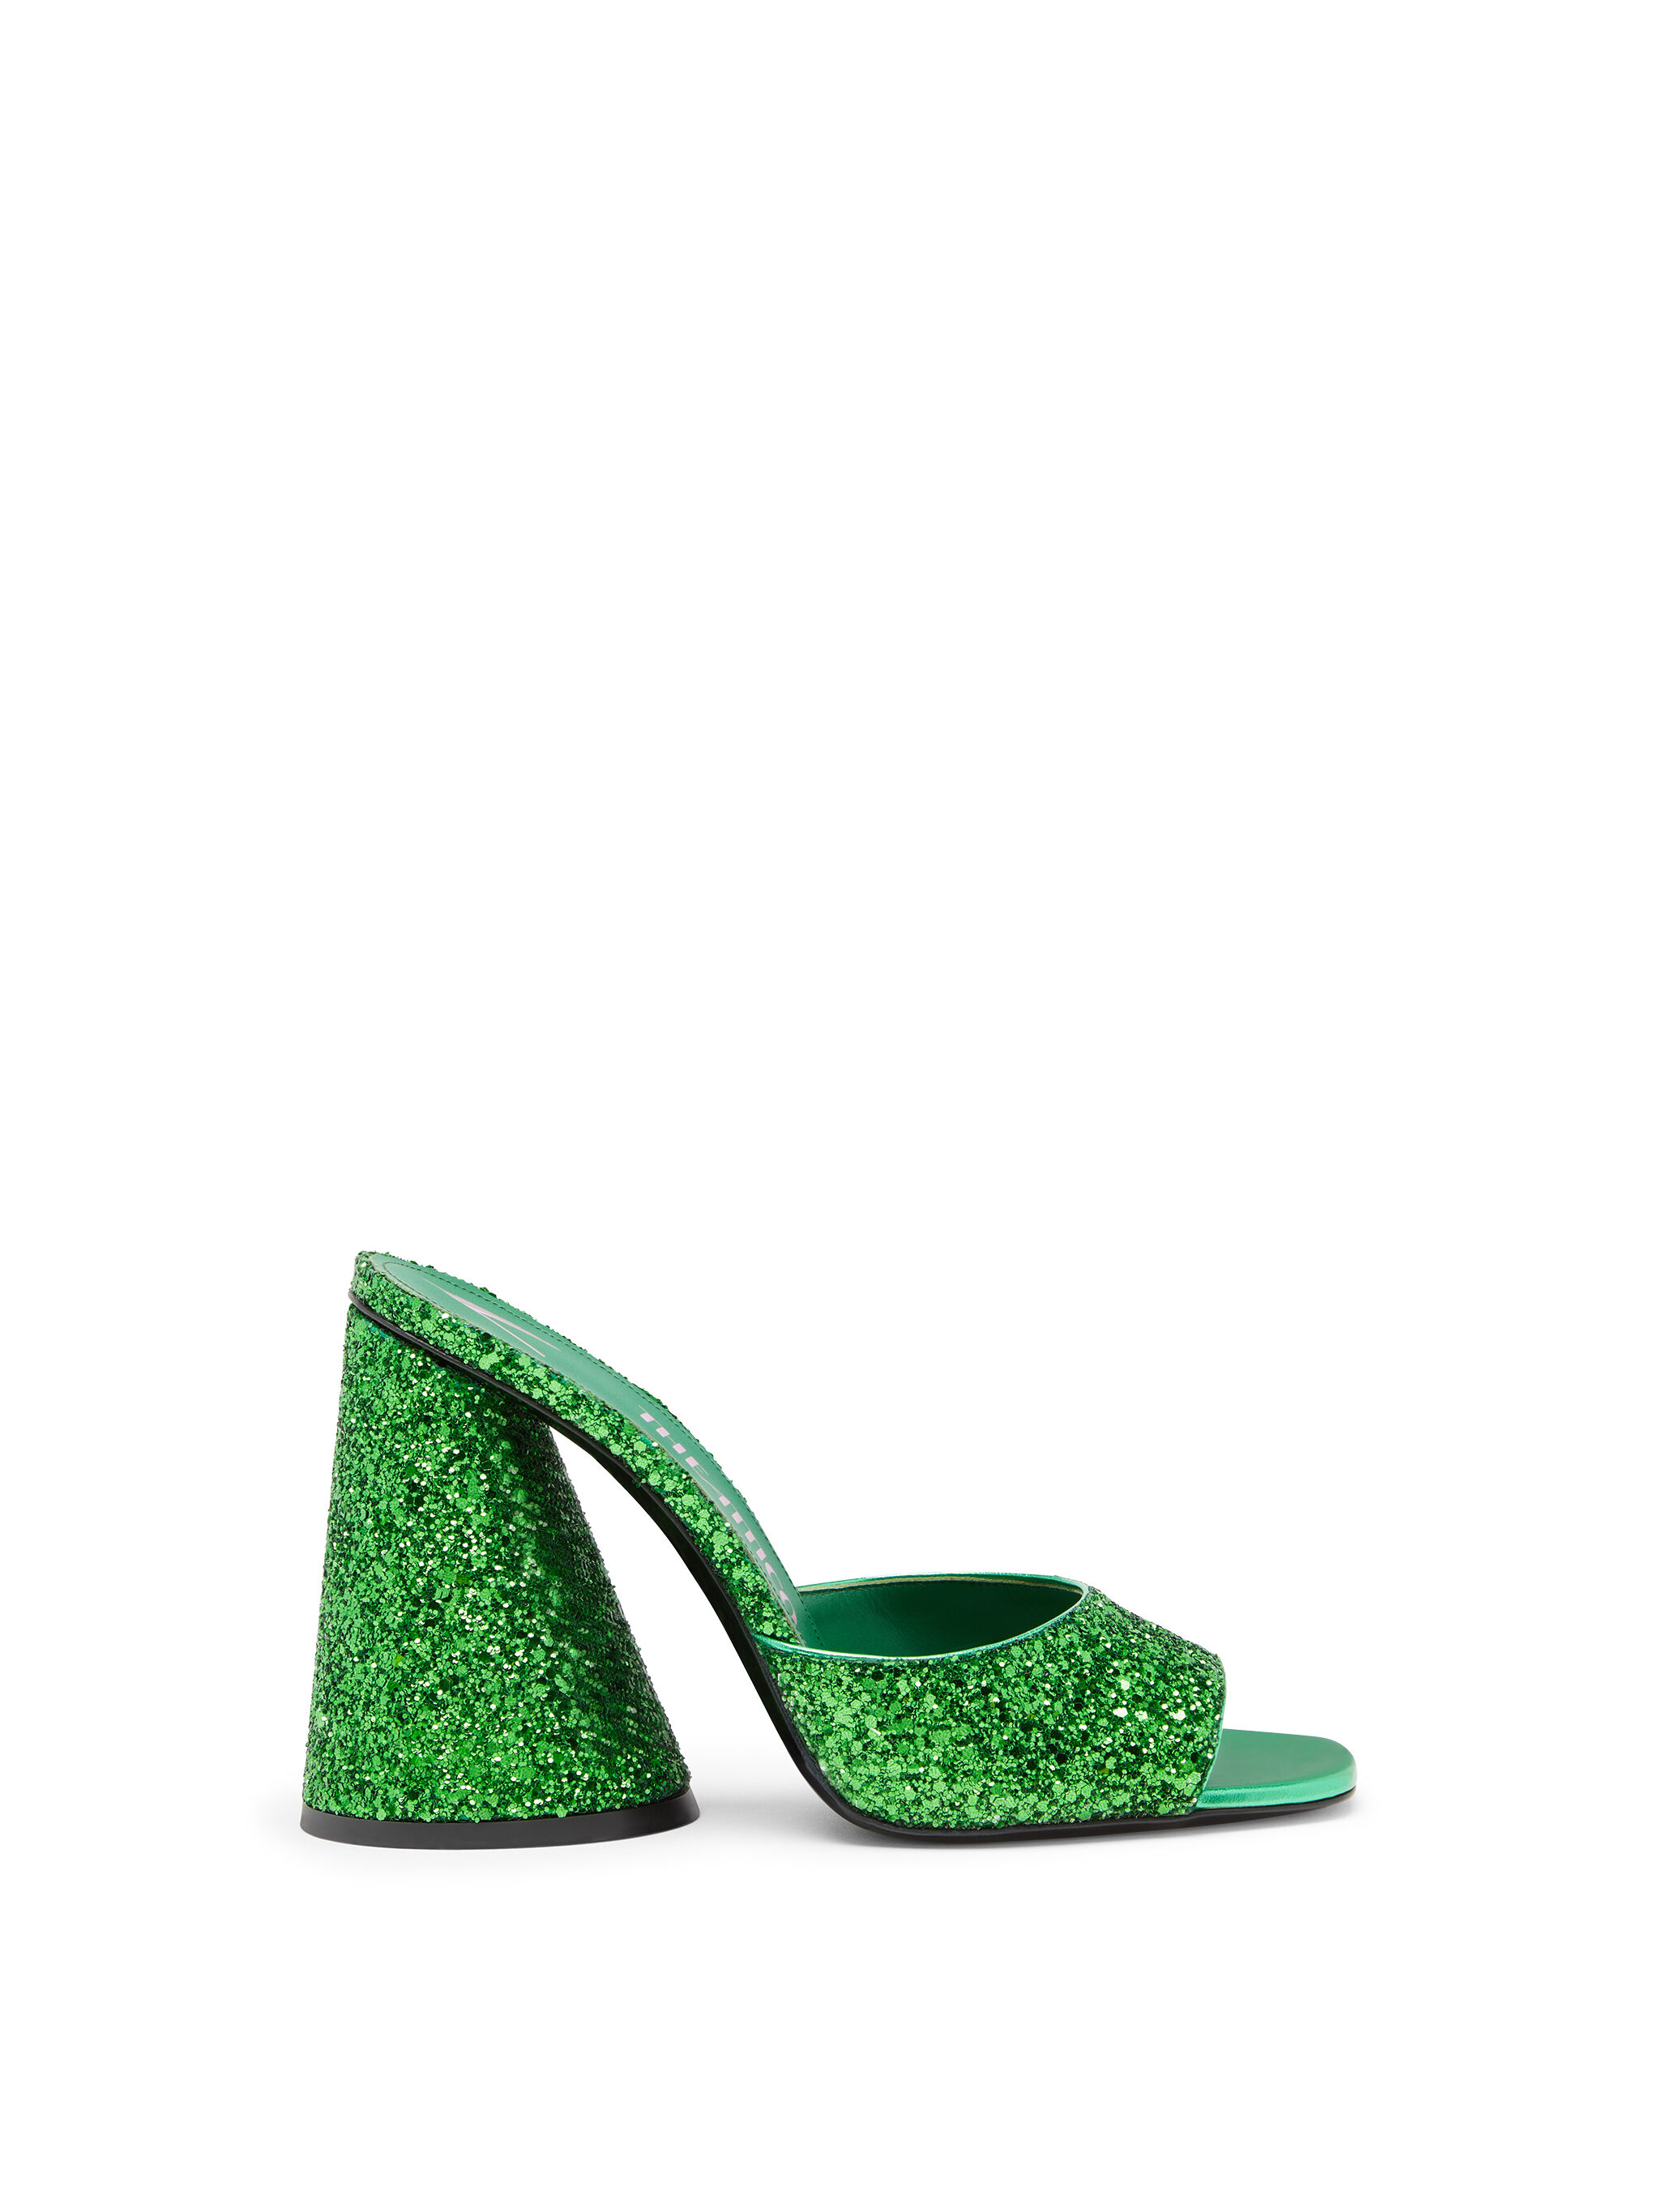 Womens Shoes Heels Mule shoes The Attico Green Satin Luz Mules 